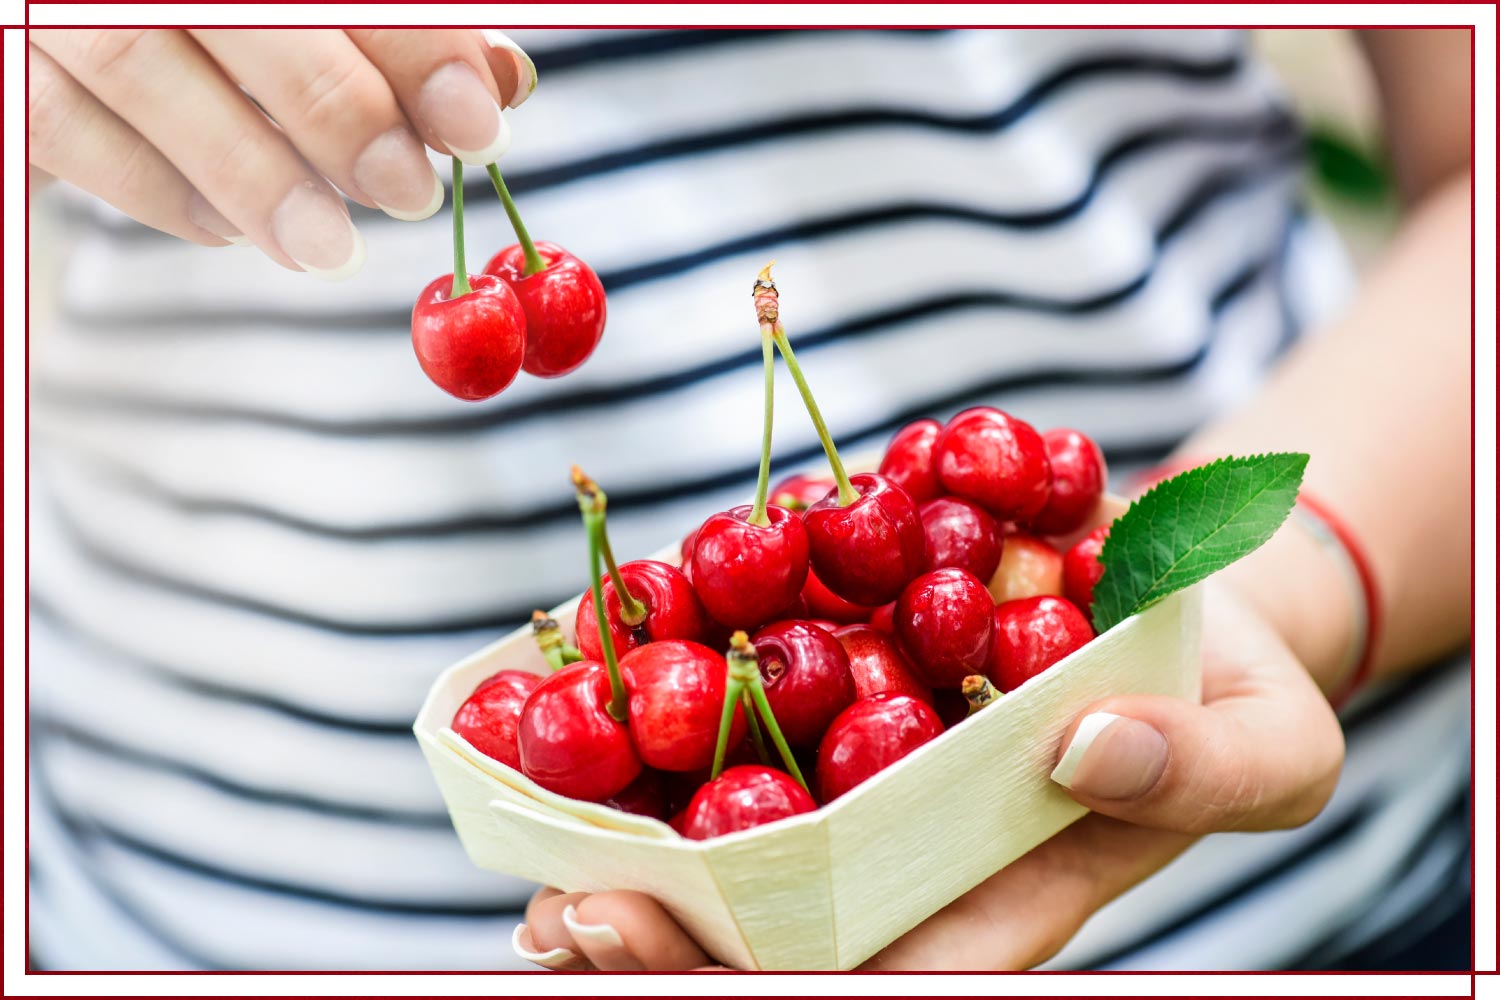 Cherry Vs. Berry- What Are the Significant Differences?